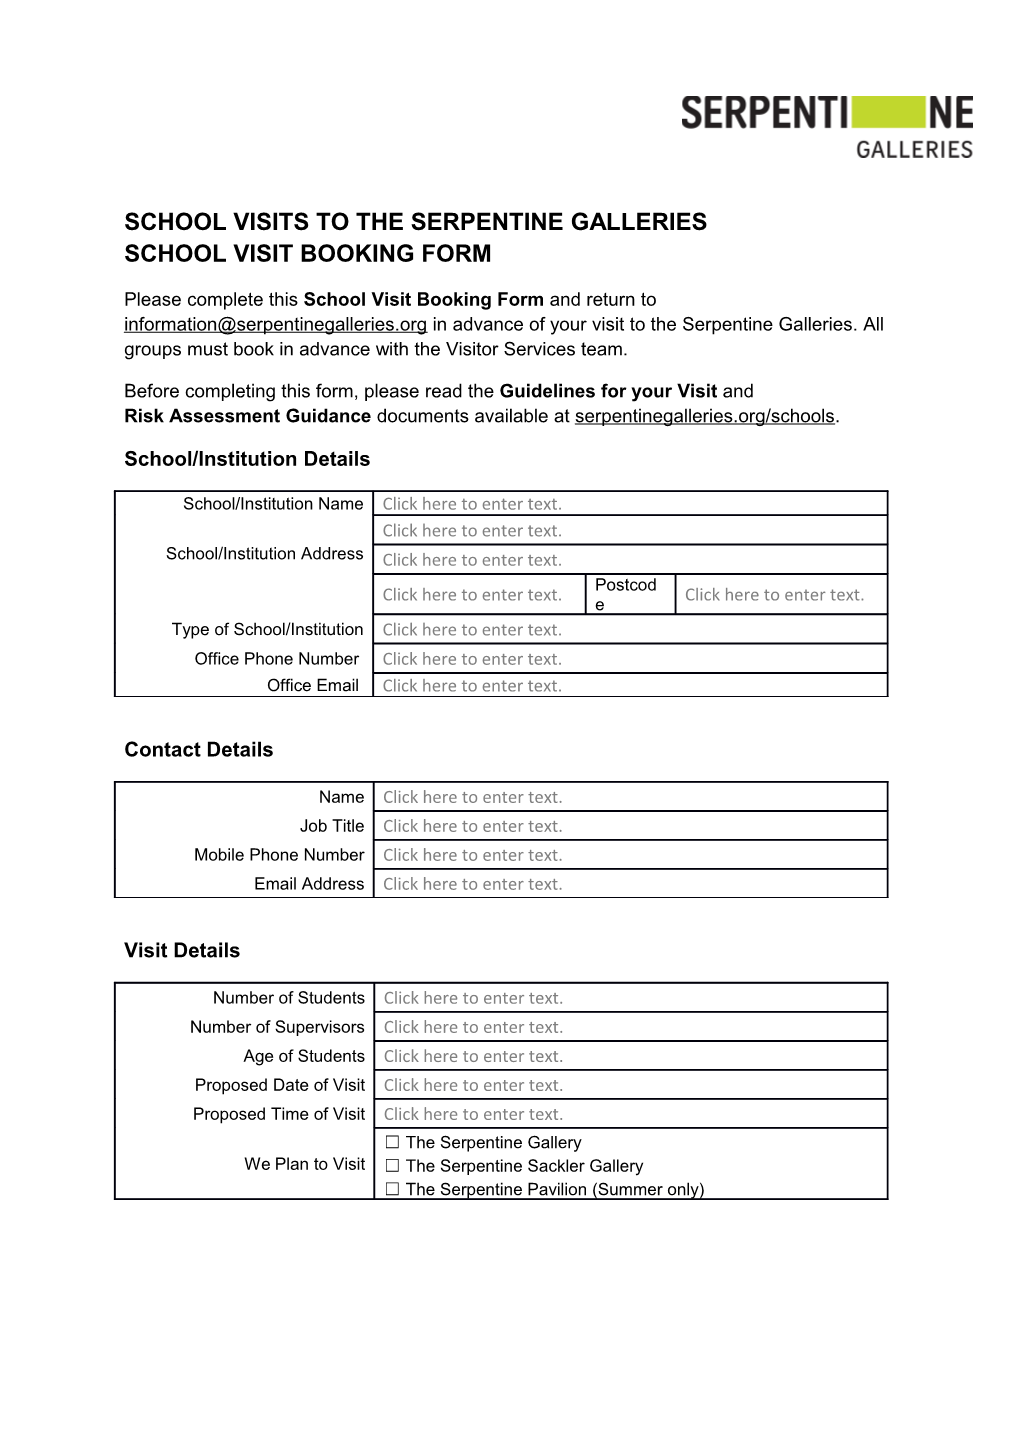 School Visits to the Serpentine Galleries School Visit Booking Form